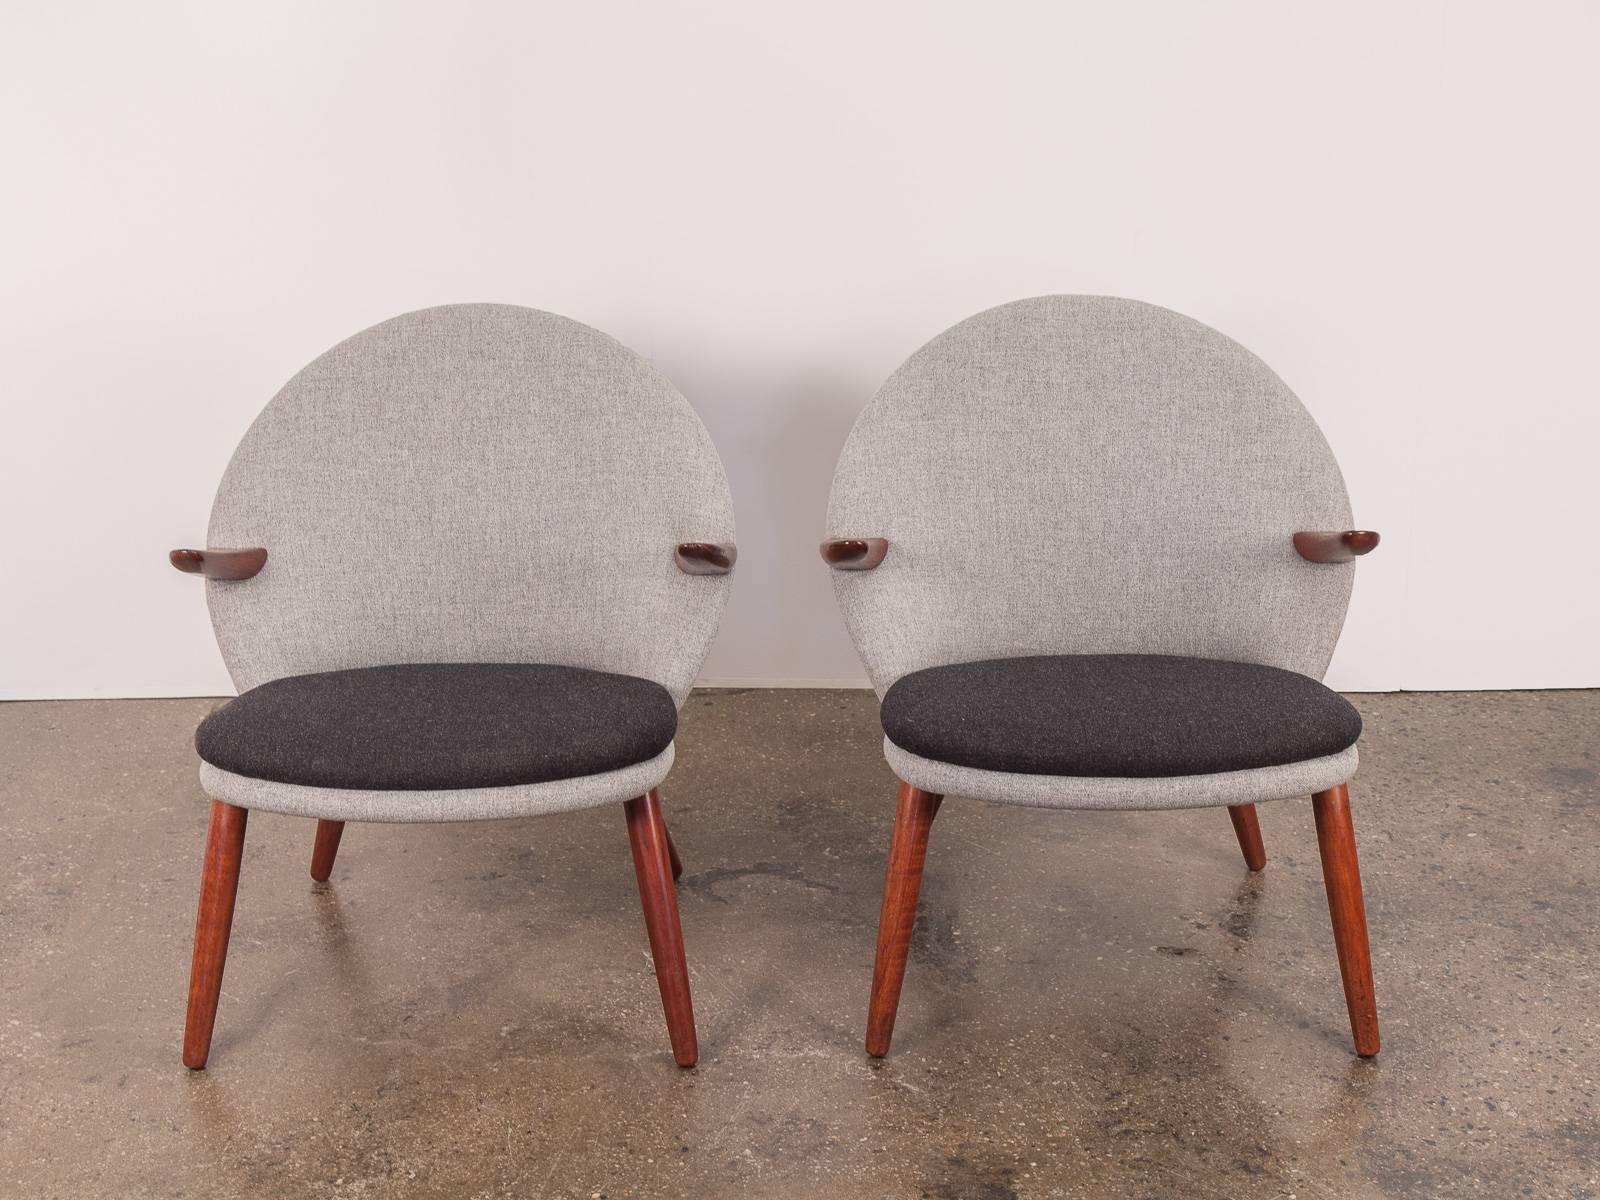 Unusual pair of easy chairs by Kurt Olsen for Glostrup Mobelfabrik. These chairs have been fully restored. The form boasts a continuous profile that is organic and sculptural — the new Maharam Tonica upholstery follows every curve and bend. Teak